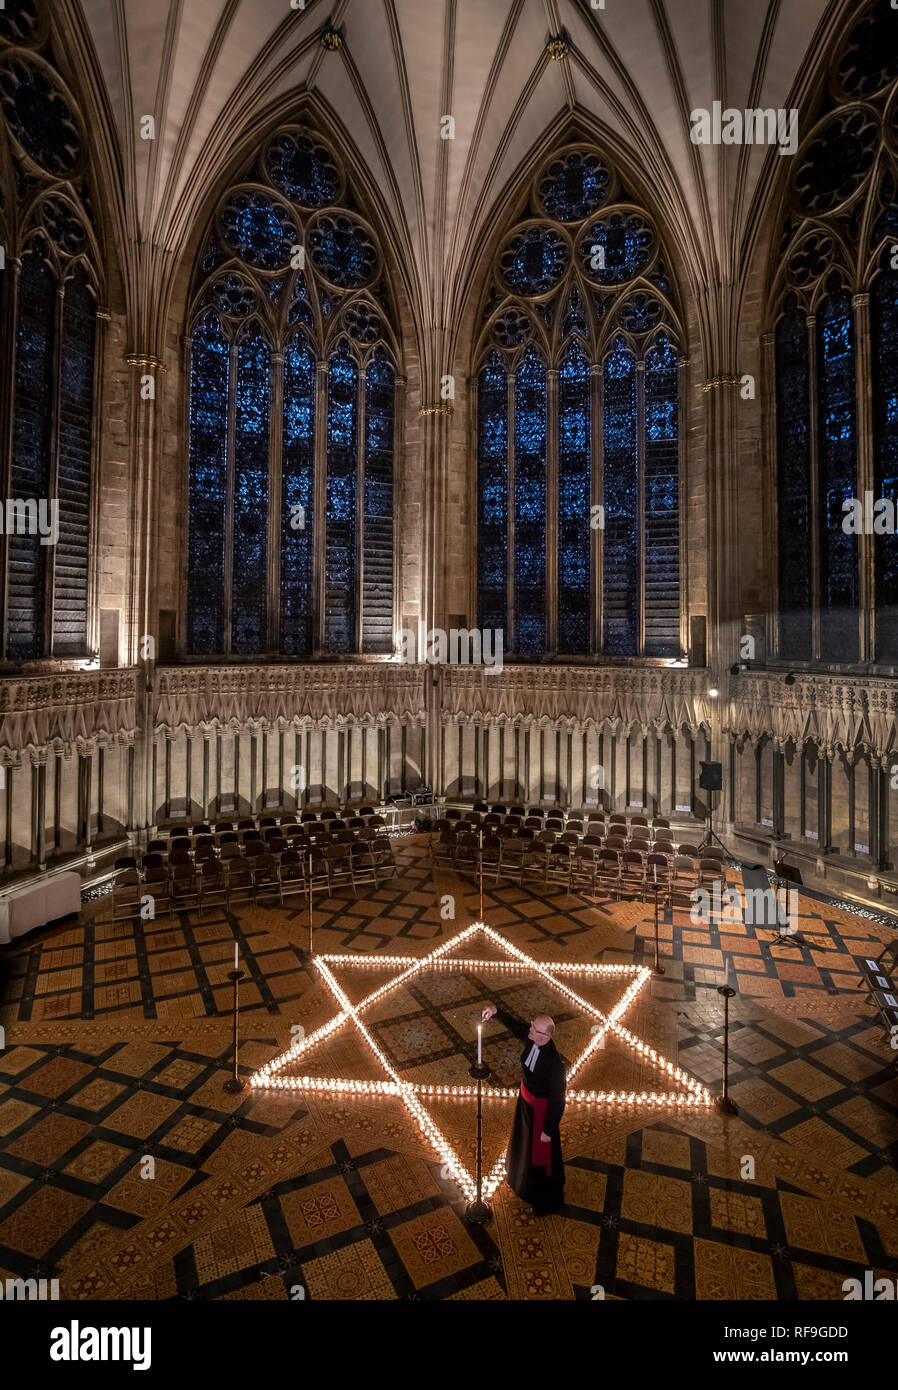 Canon Chancellor Christopher Collingwood helps light six hundred candles in the shape of the Star of David, in memory of more than 6 million Jewish people murdered by the Nazis in the Second World War, at York Minster in York. Stock Photo